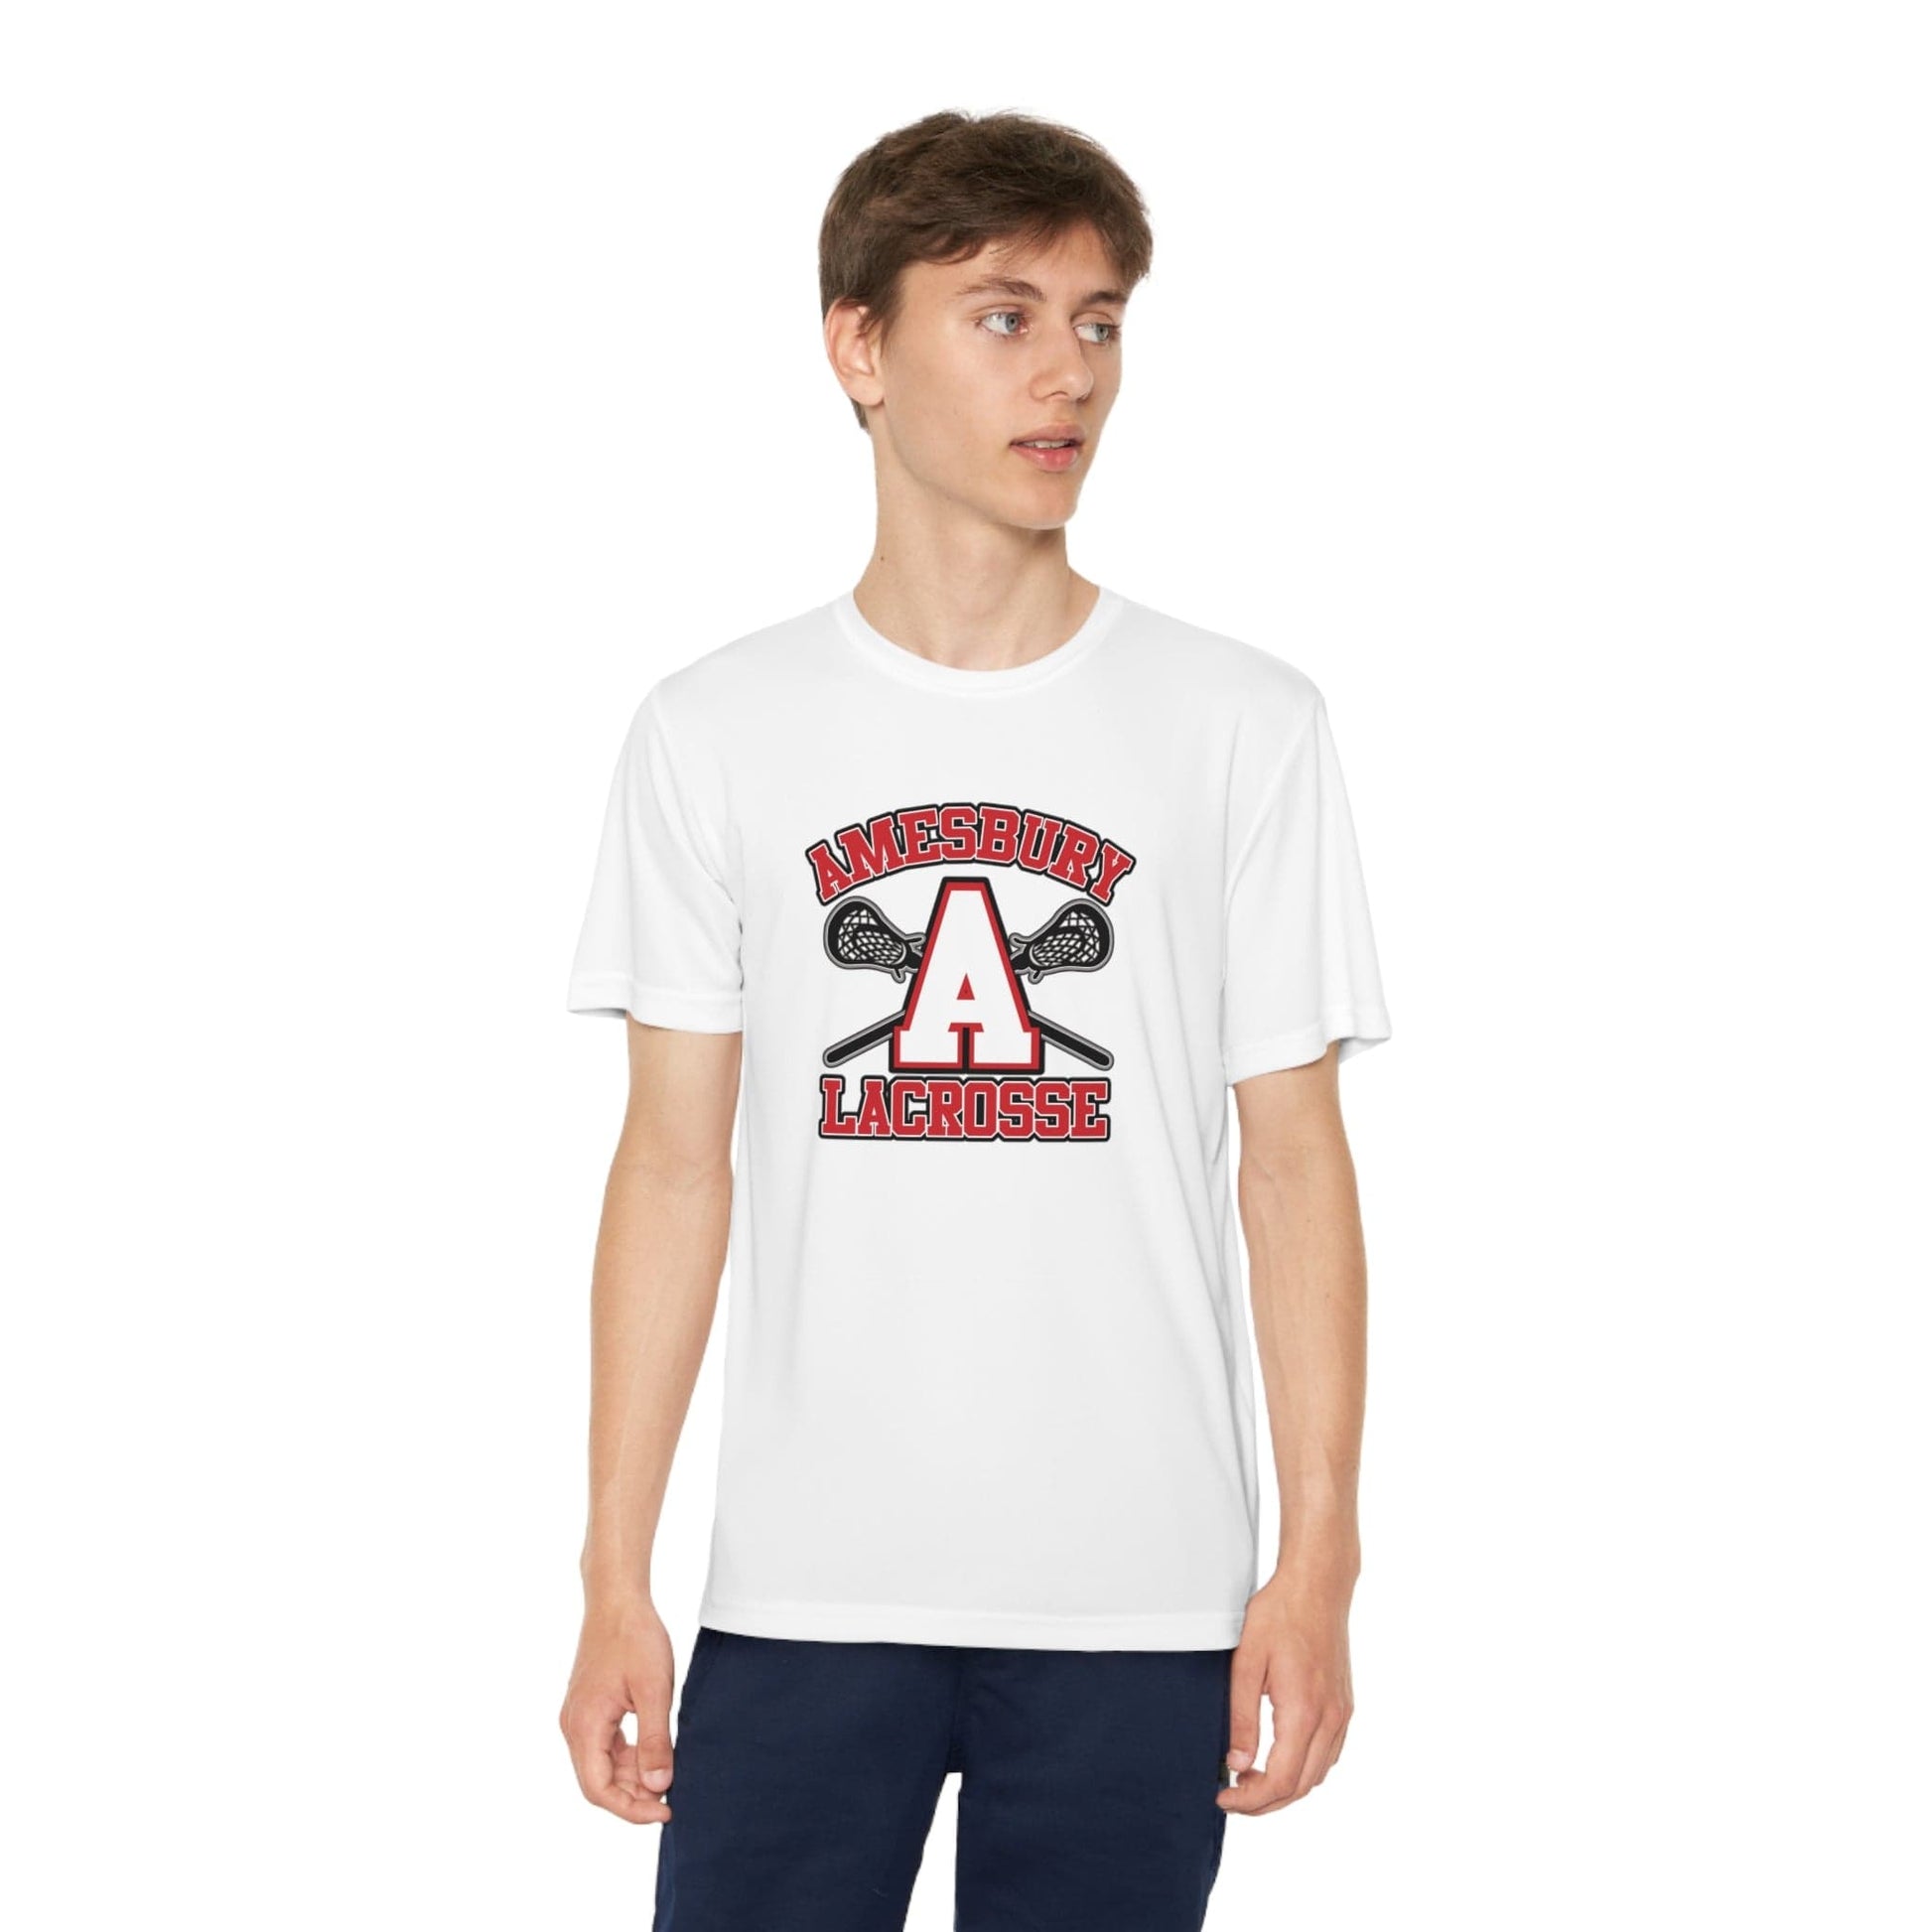 Copy of Amesbury Youth Lacrosse Athletic T-Shirt Signature Lacrosse